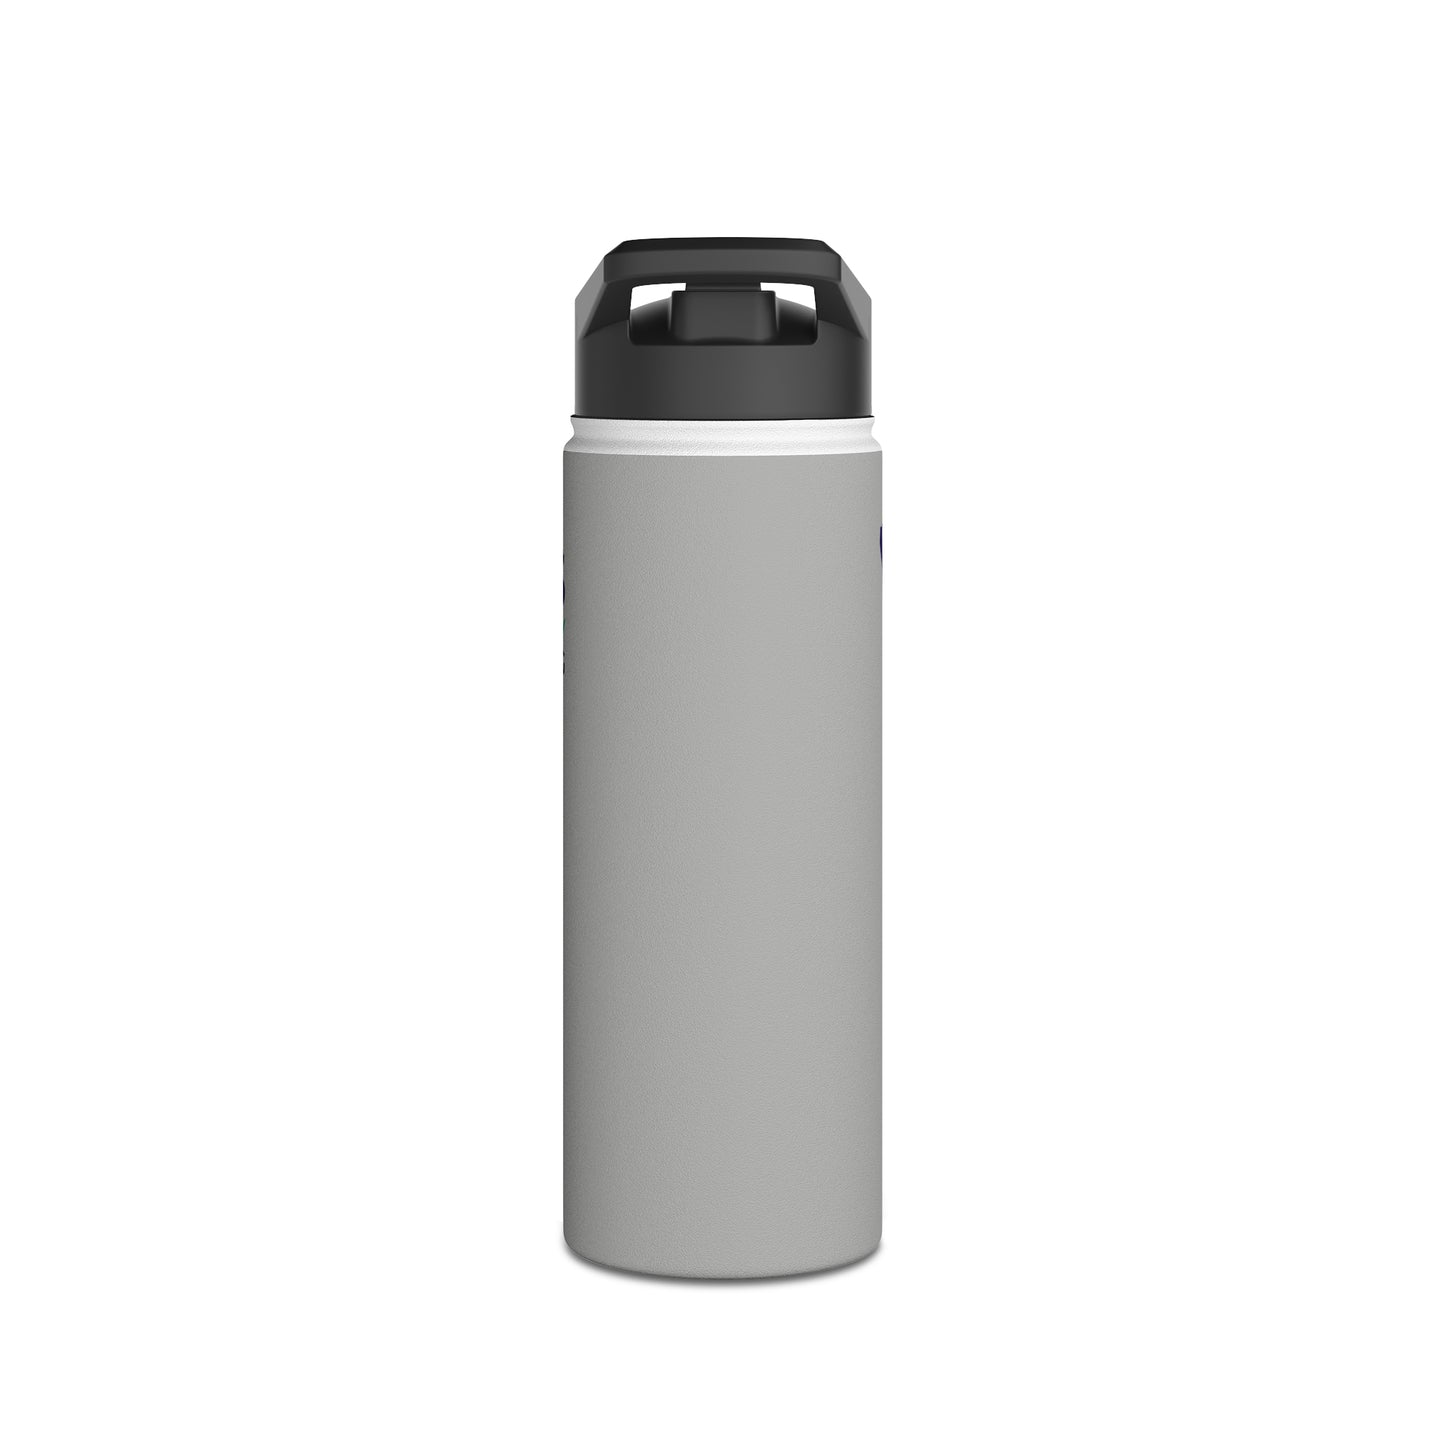 Edwards Managed Technology Stainless Steel Water Bottle, Standard Lid